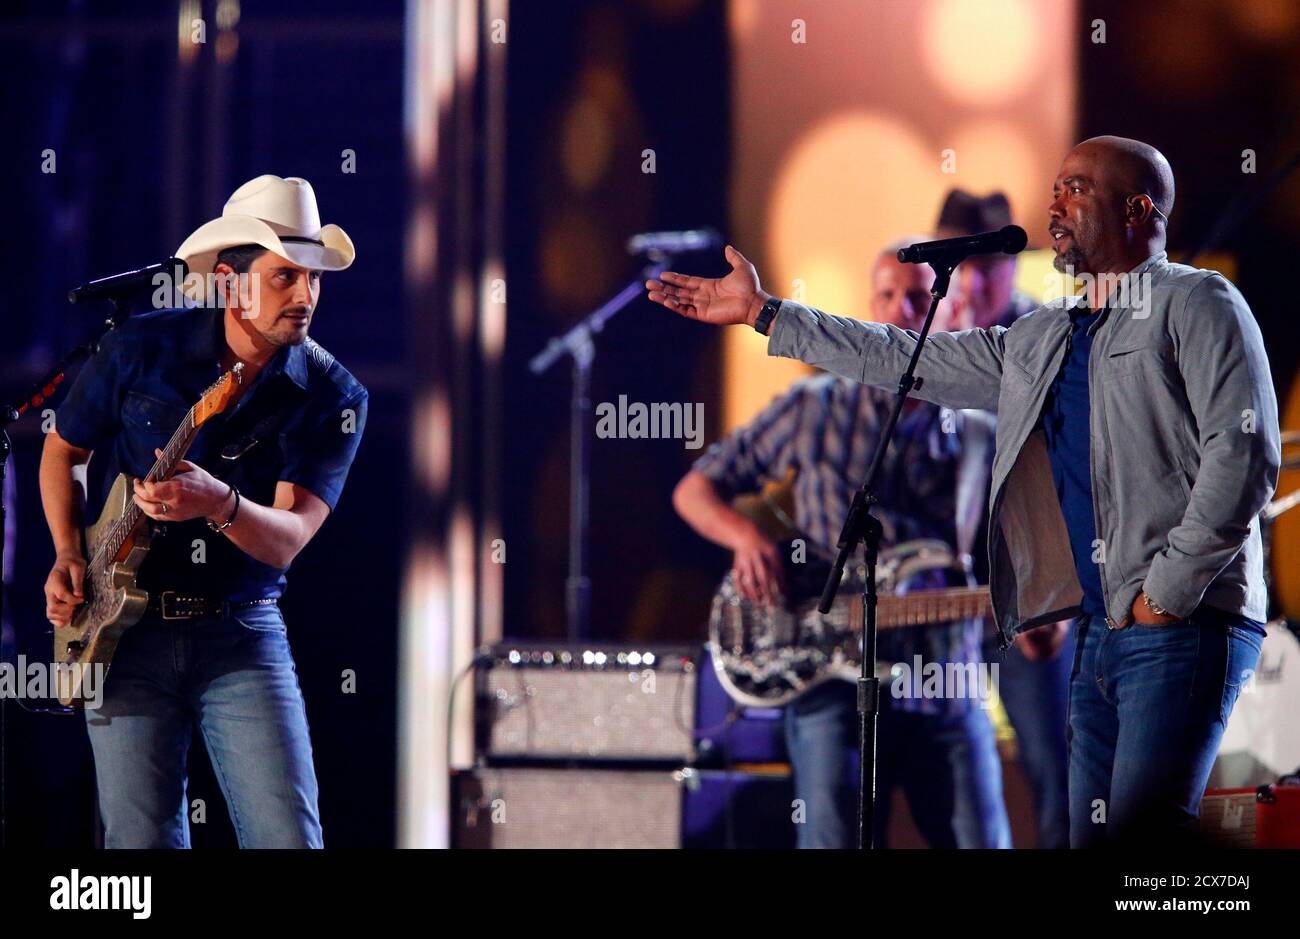 Brad Paisley (L) and Darius Rucker perform 'Let the Good TImes Roll' at the 50th Annual Academy of Country Music Awards in Arlington, Texas April 19, 2015.  REUTERS/Mike Blake Stock Photo